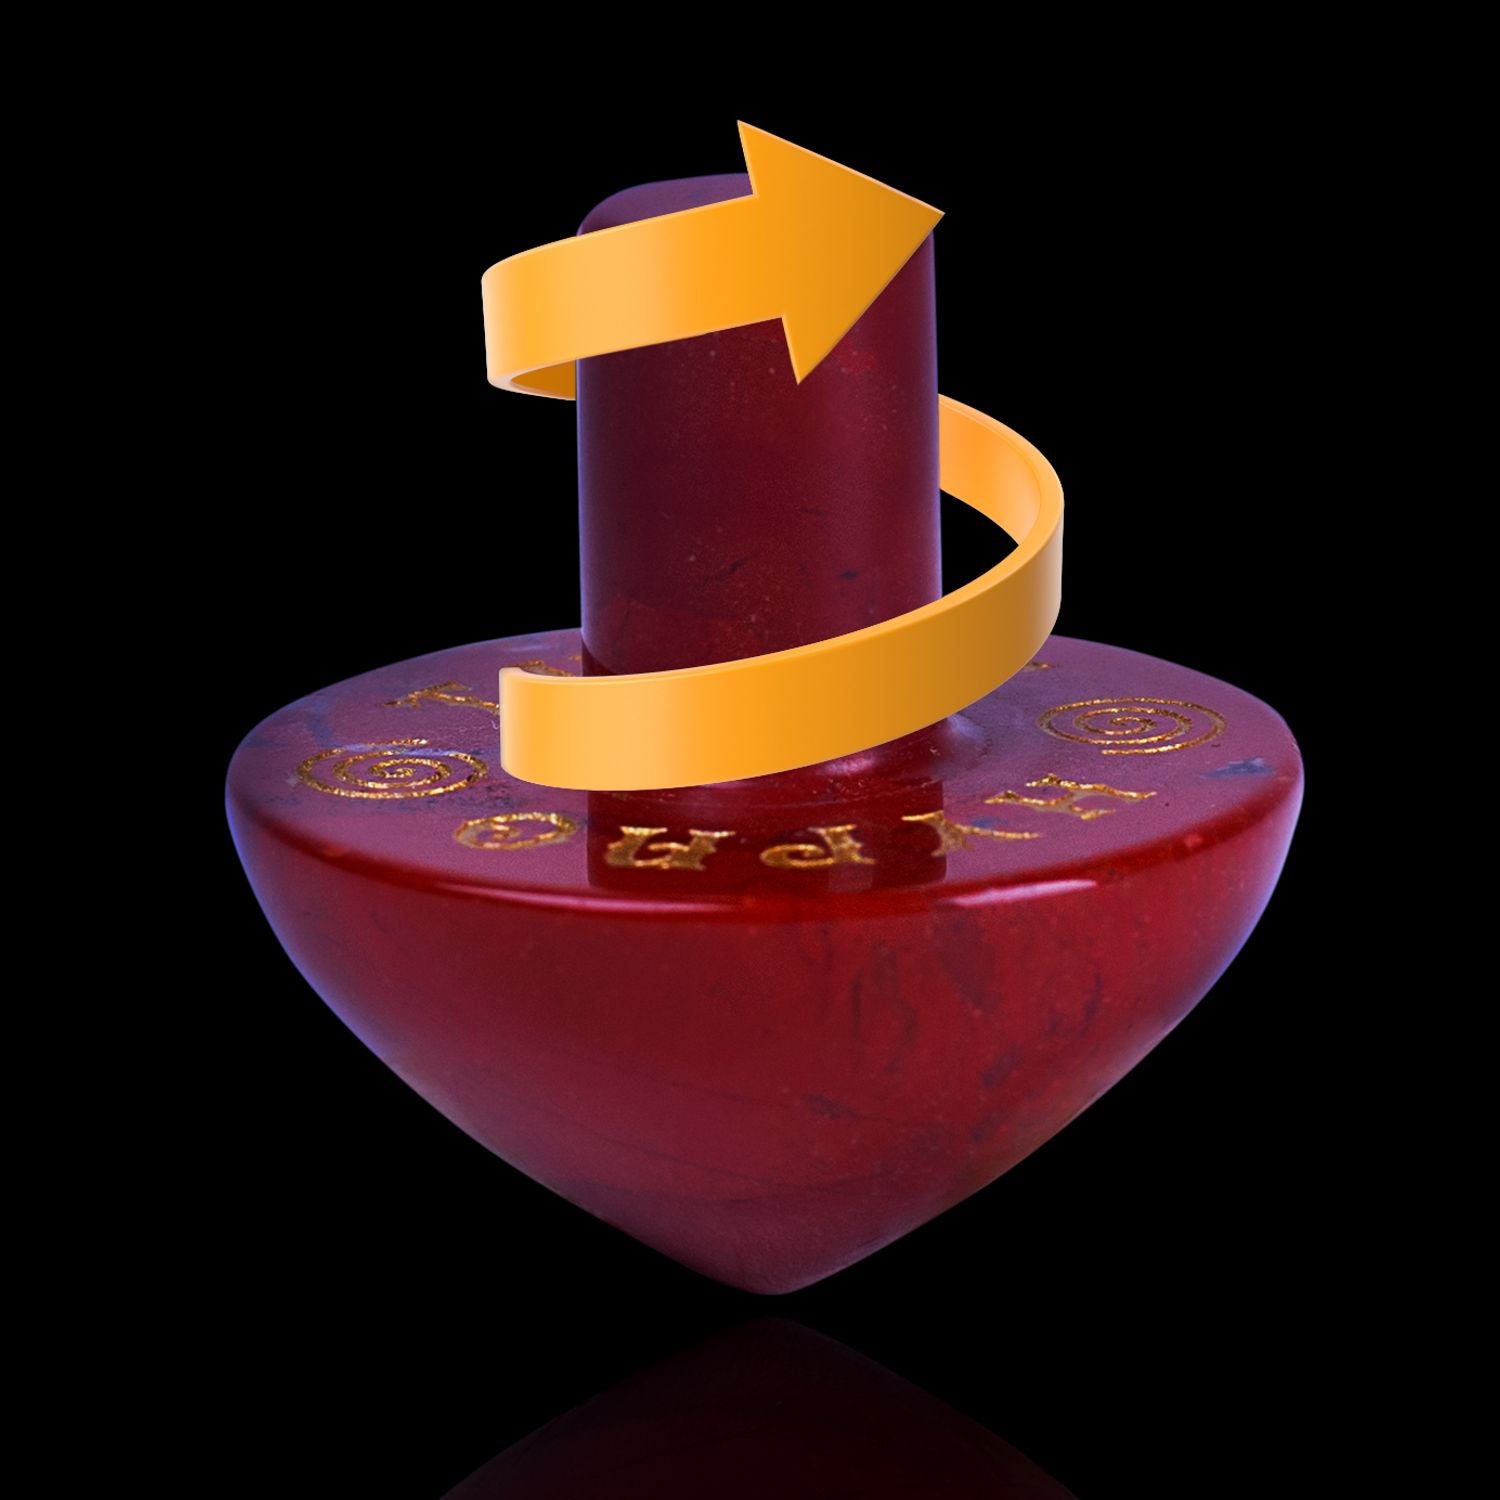 Naturally Wicked Hypnotwist Confront Crystal Hypnotic Spinning Top Carved From Red Jasper Crystal